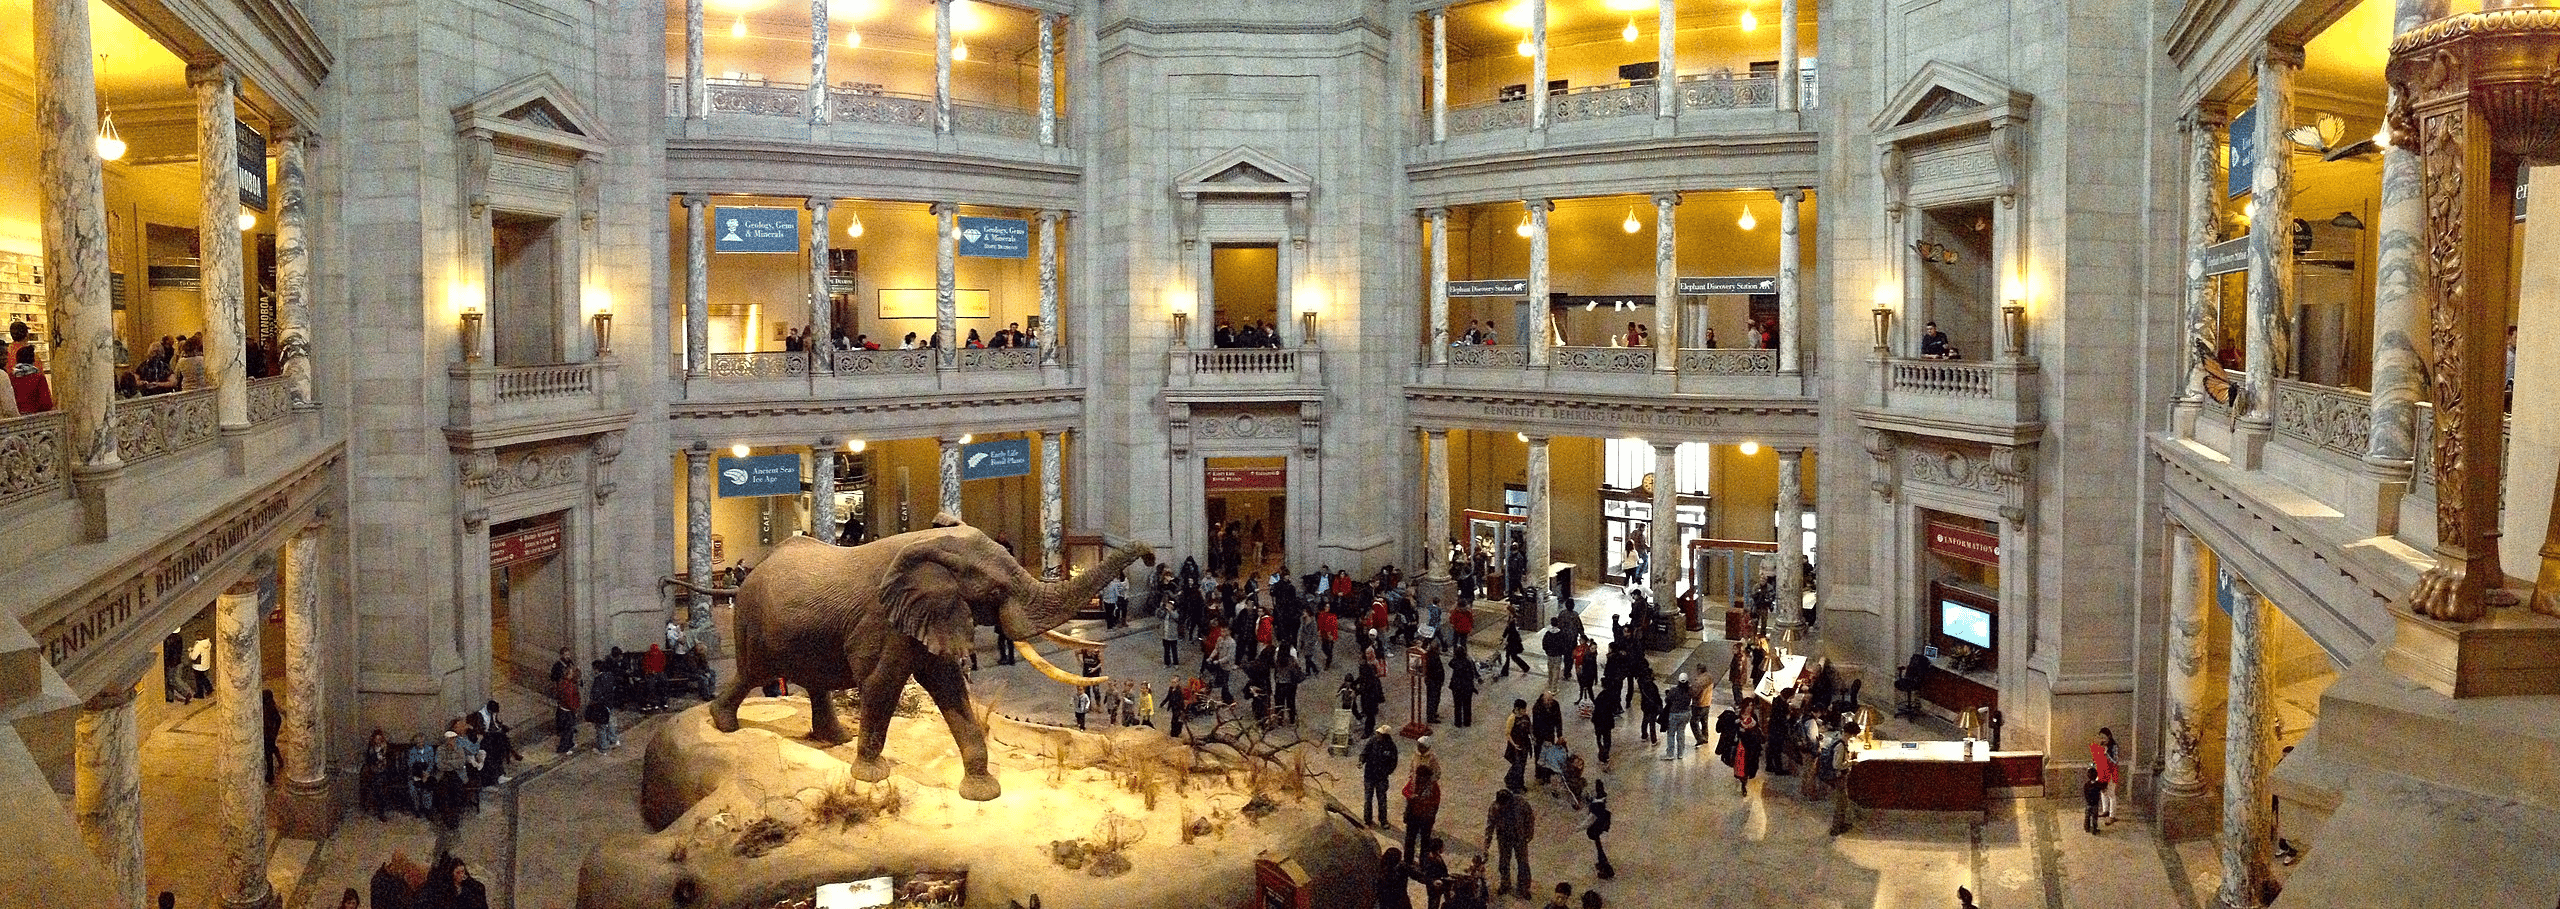 Panoramic view of the Rotunda at the National Museum of Natural History